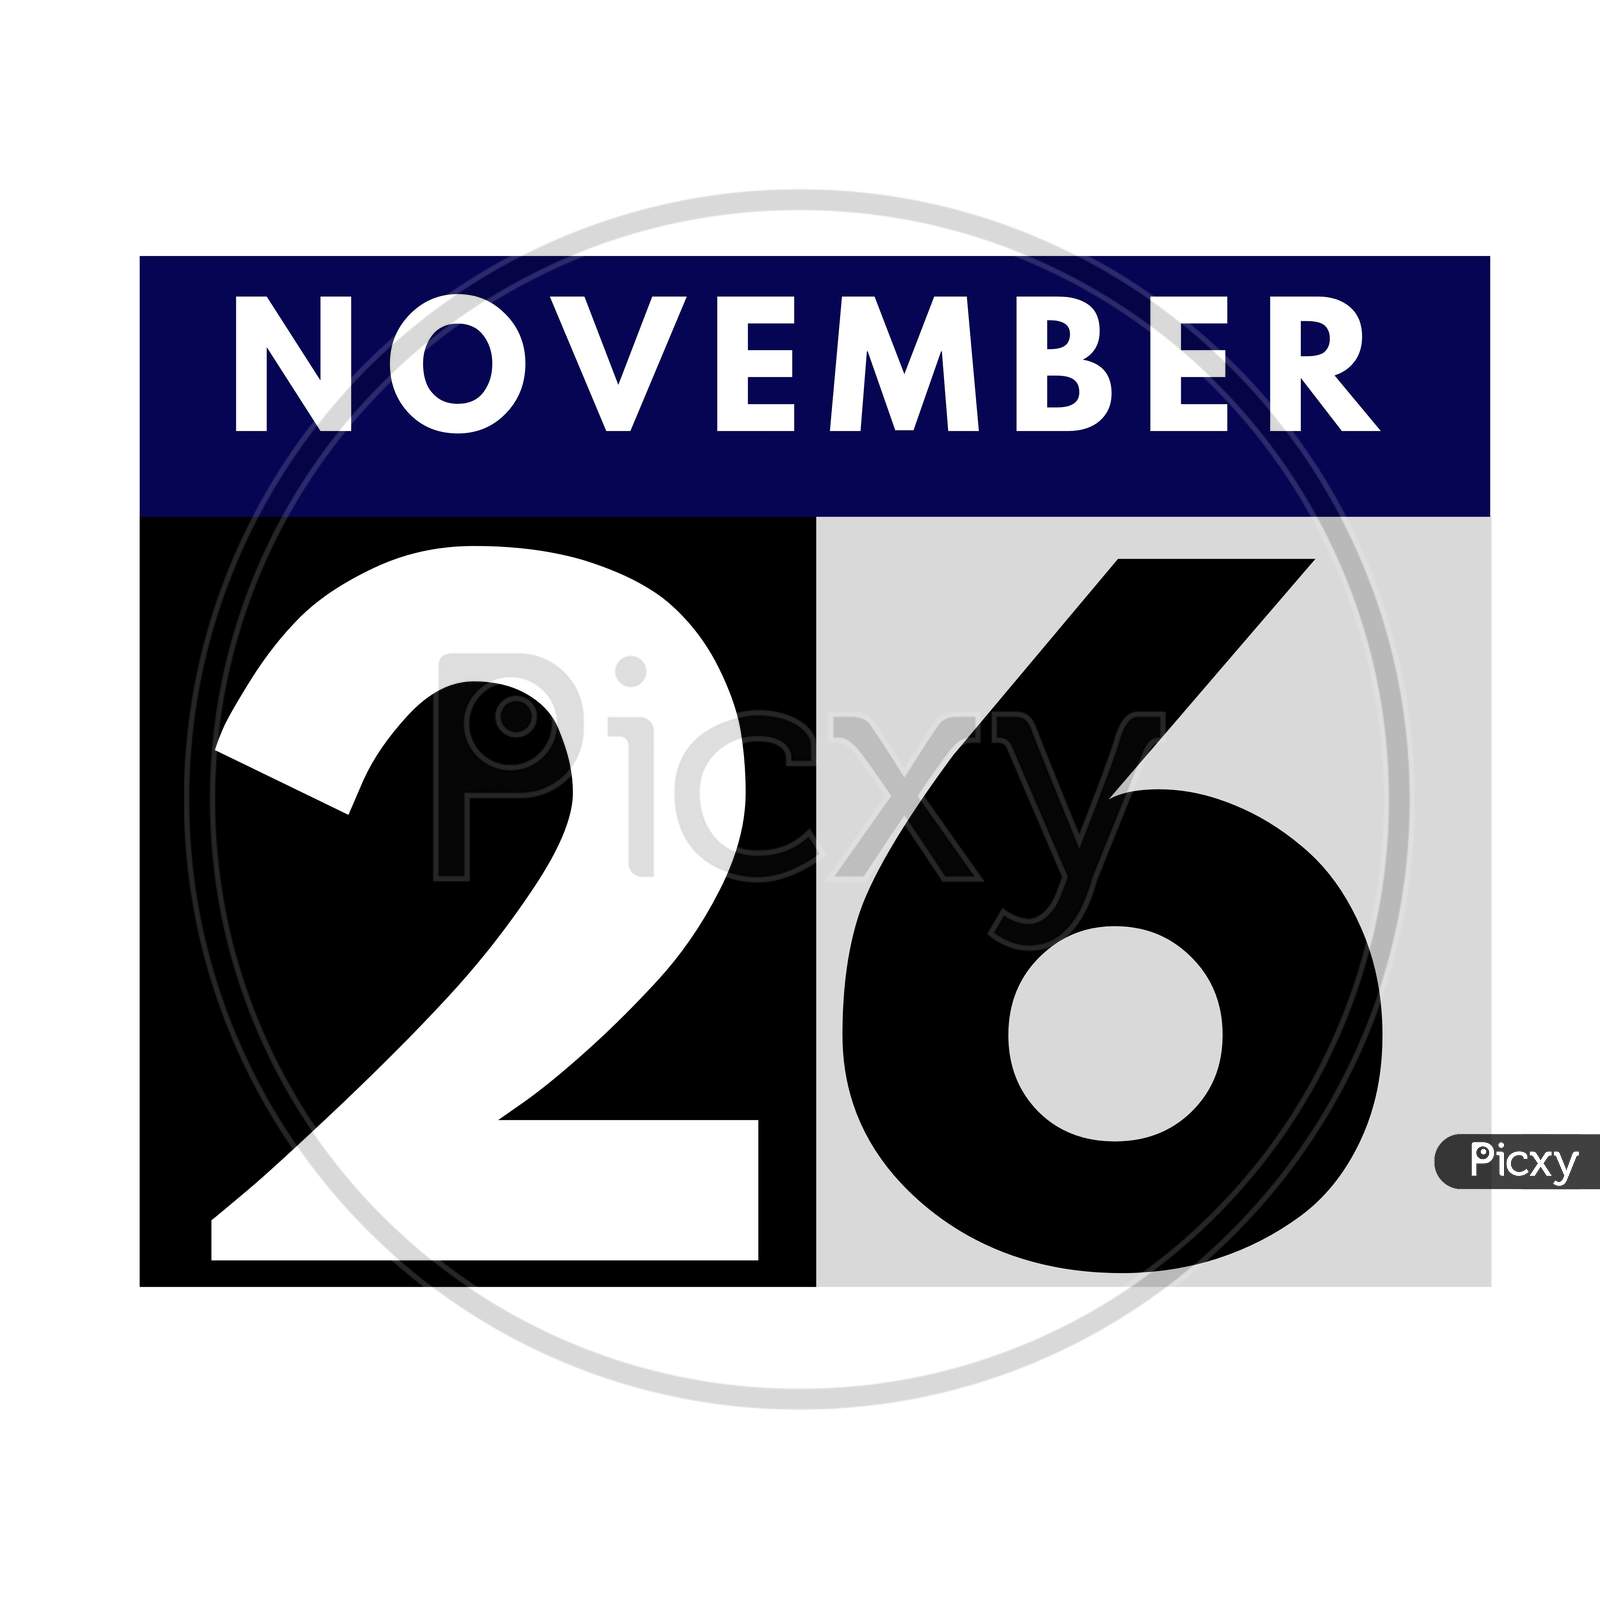 November 26 . Flat Daily Calendar Icon .Date ,Day, Month .Calendar For The Month Of November